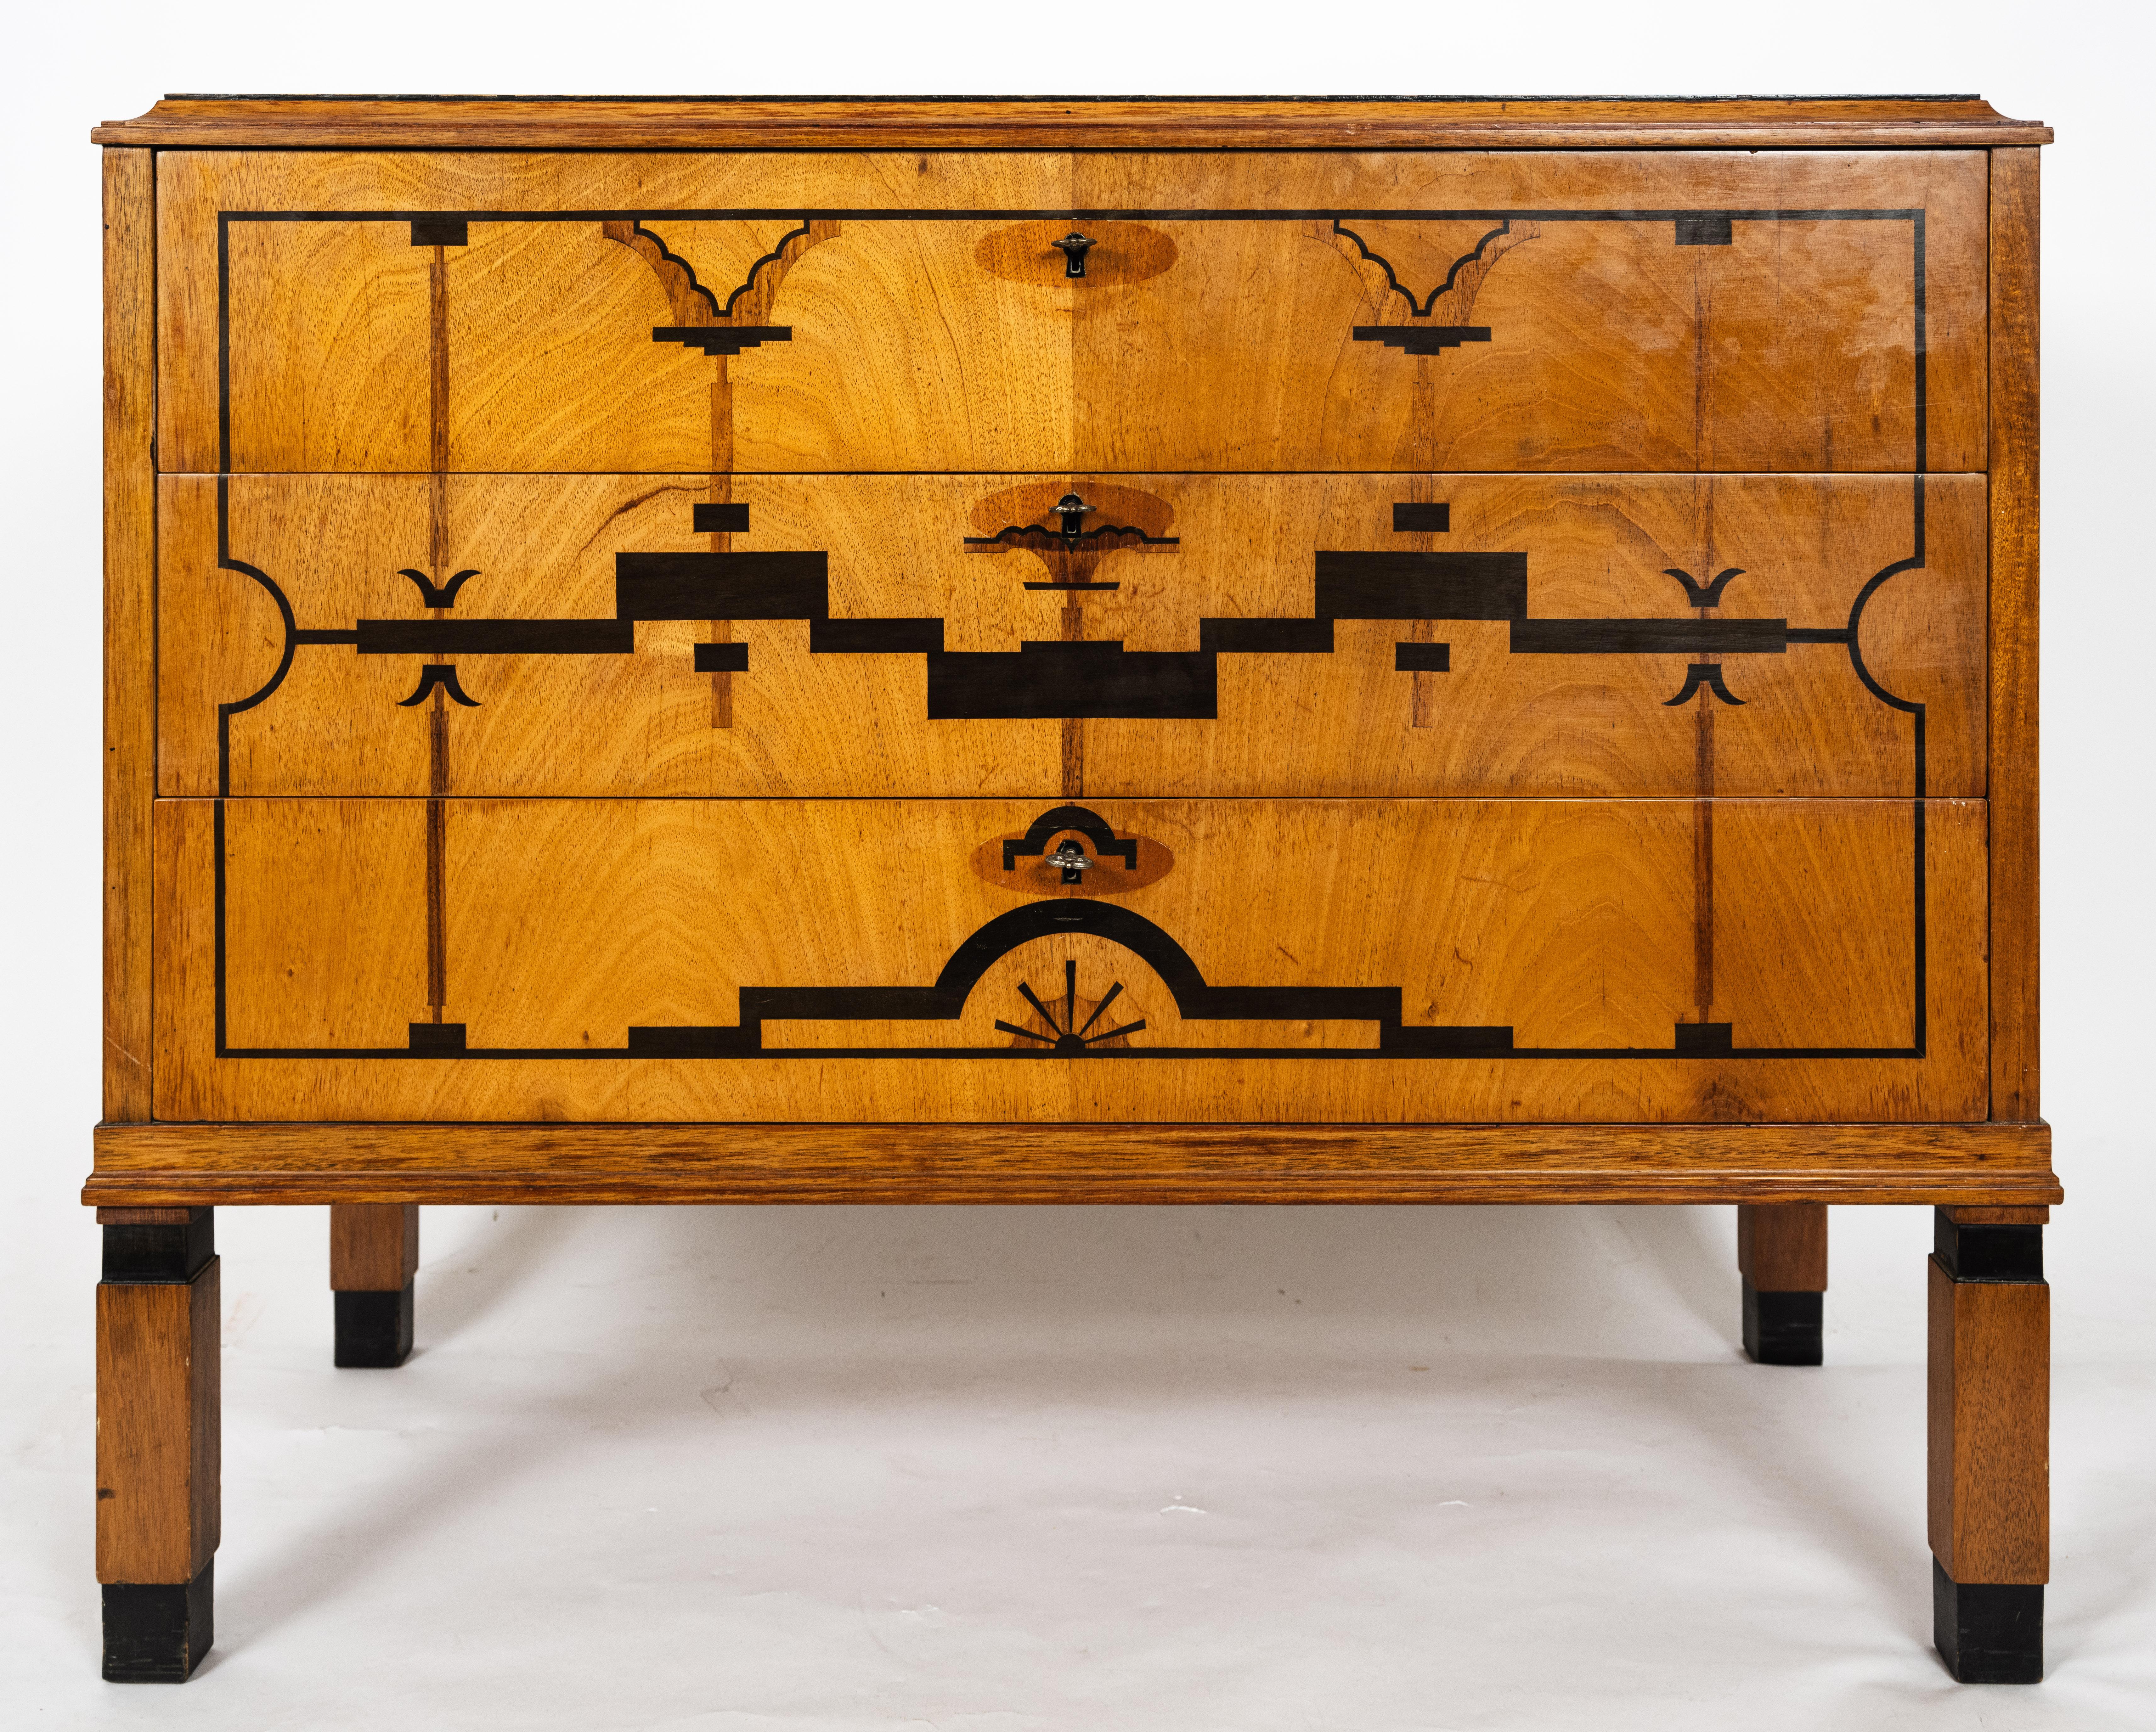 A 1930s Swedish Art Deco chest made of inlaid elm with rosewood and walnut veneer. having stylized geometric details, square legs, and three drawers. 